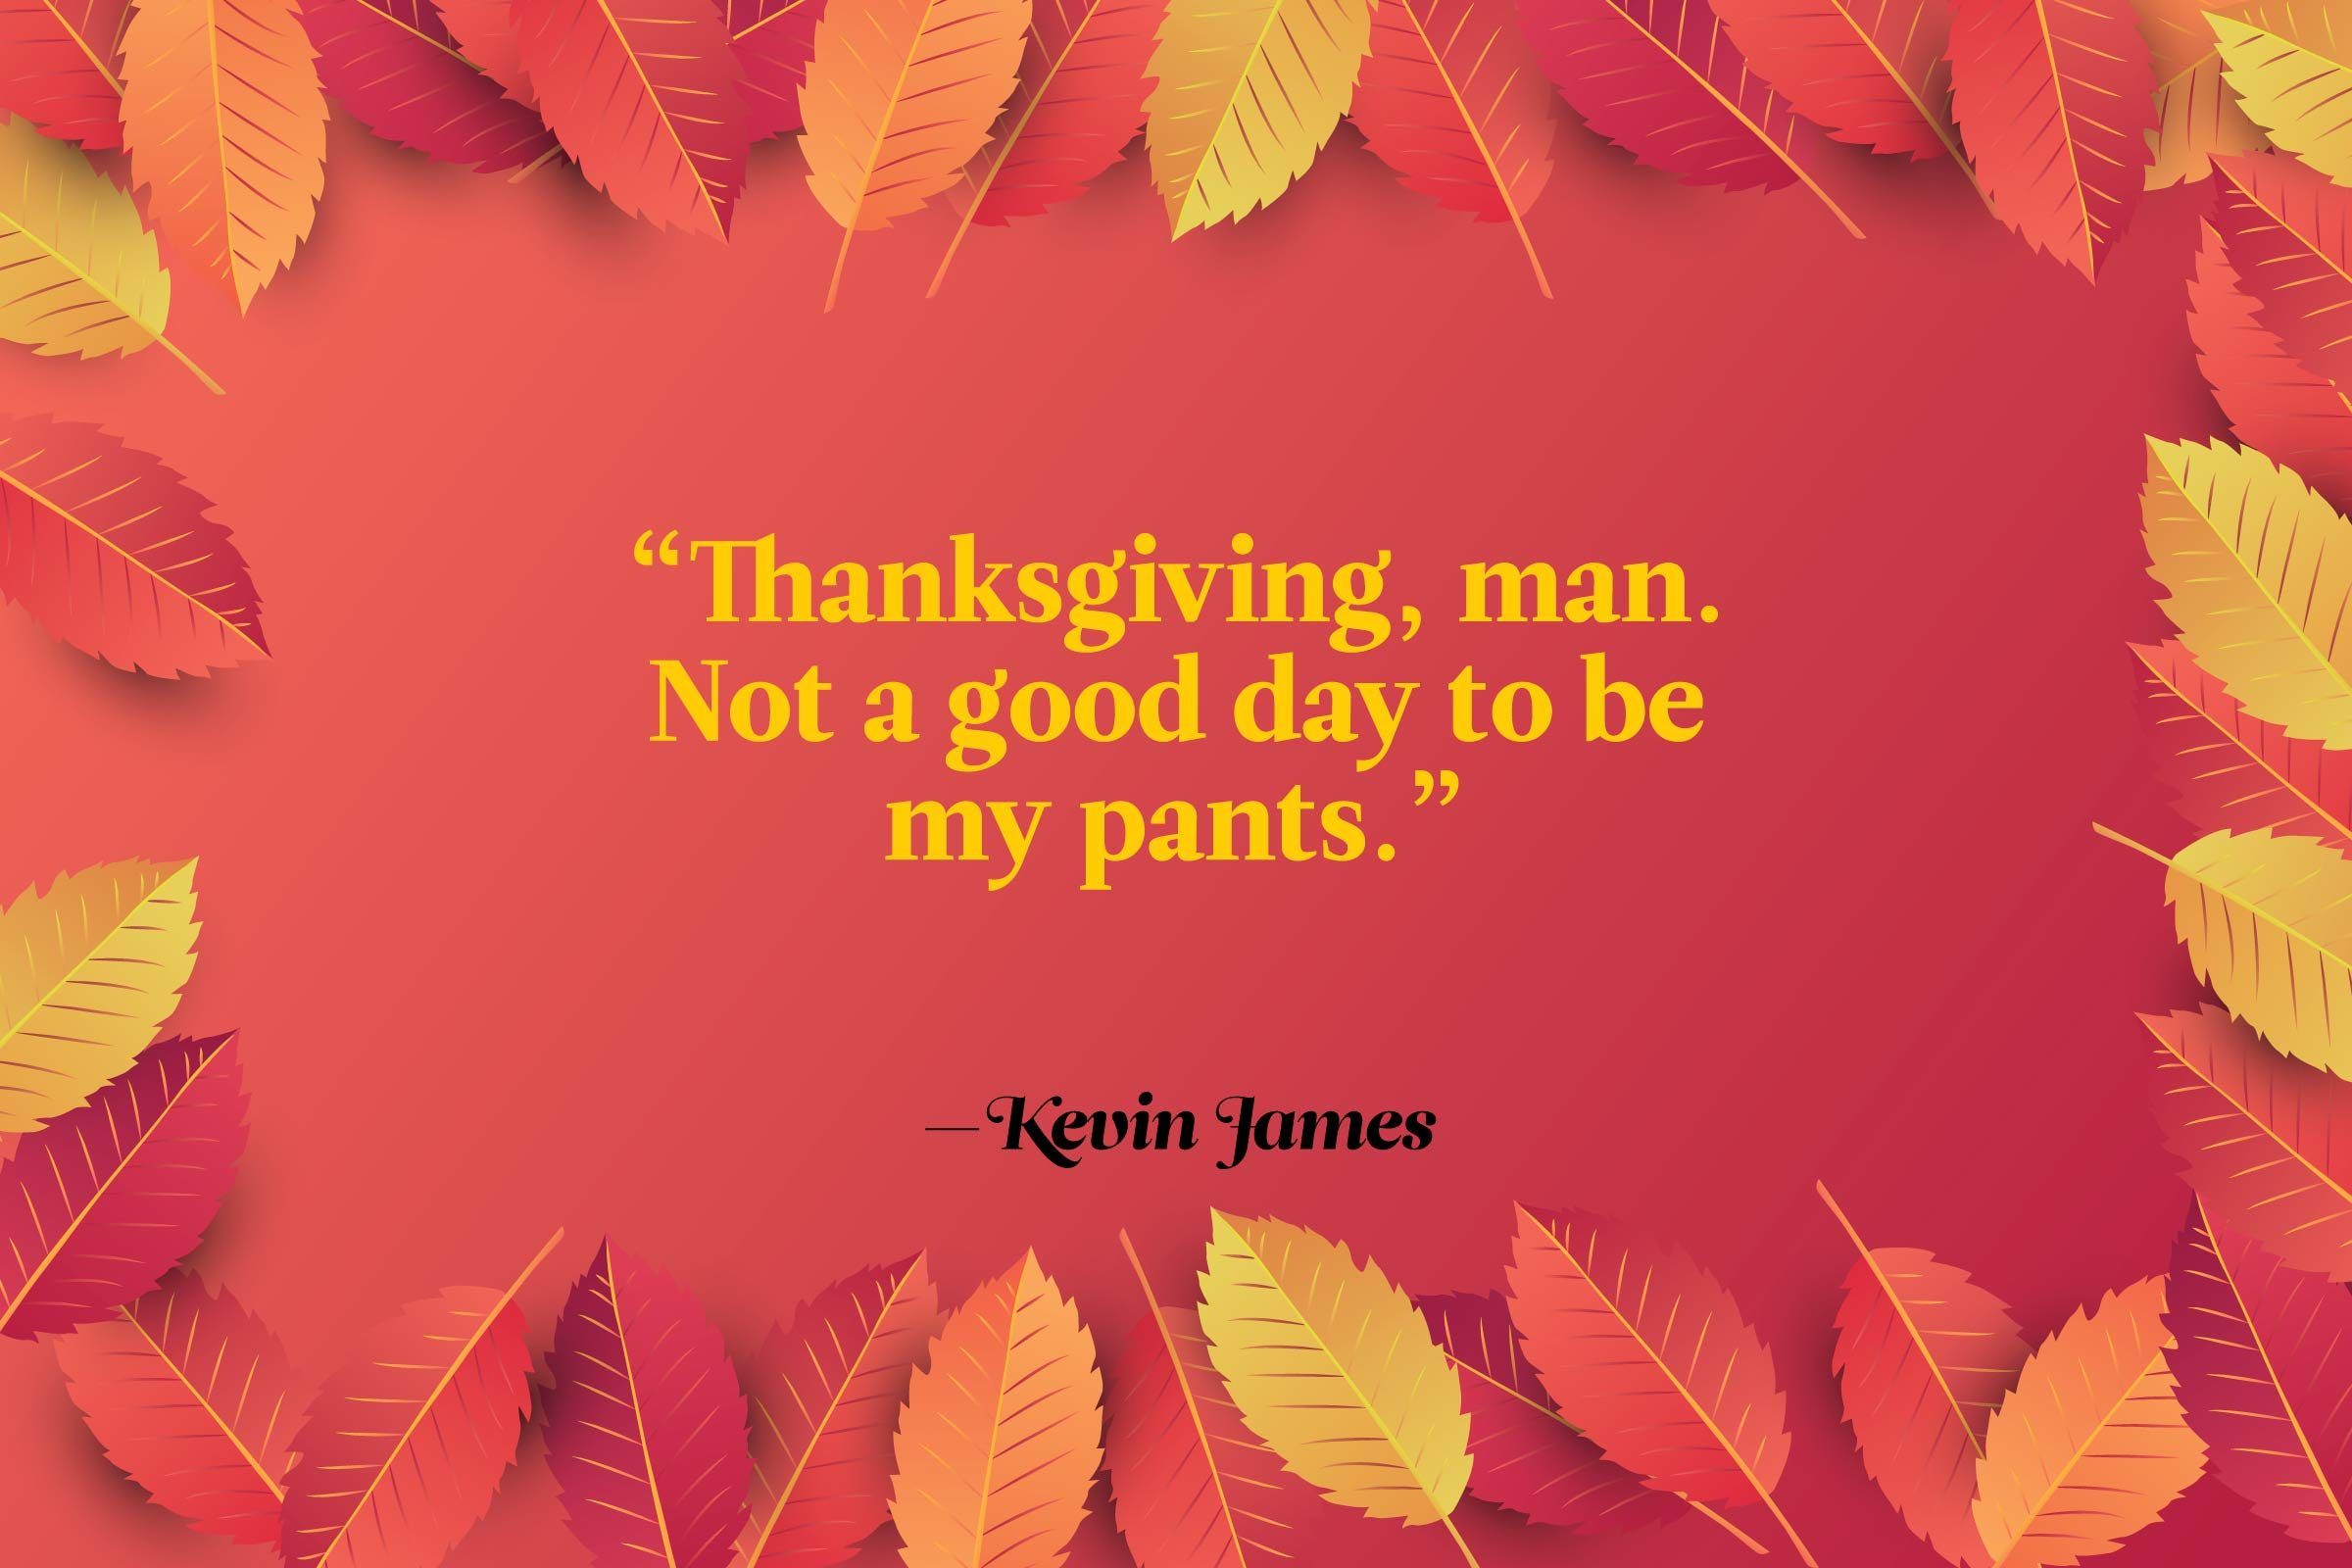 20 Funny Thanksgiving Quotes to Share at the Table | Reader's Digest